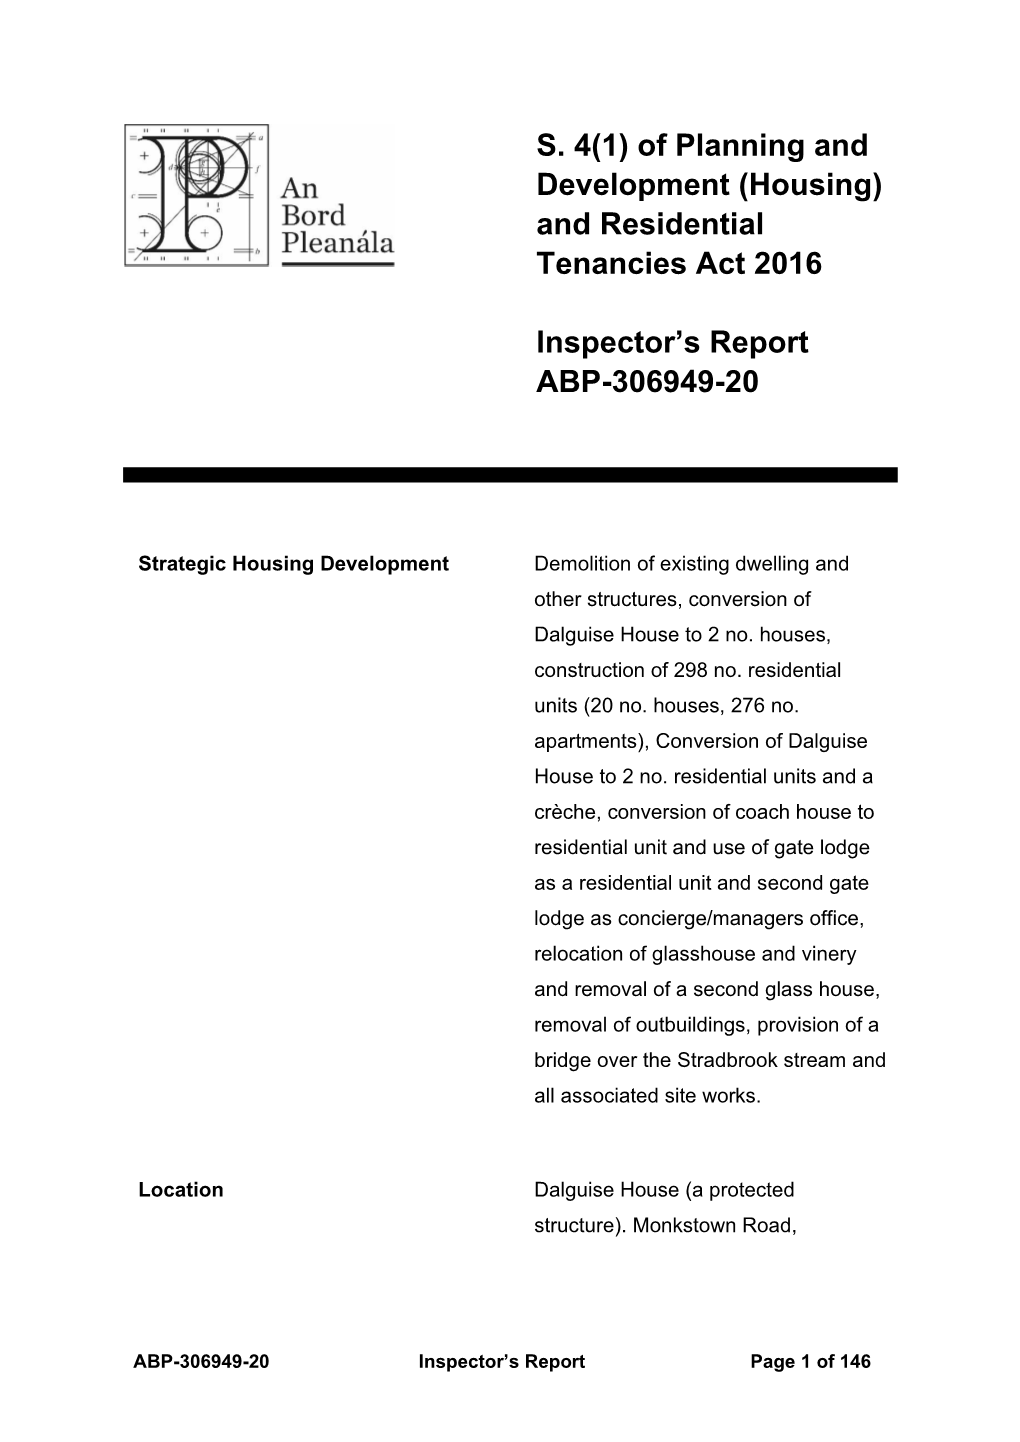 S. 4(1) of Planning and Development (Housing) and Residential Tenancies Act 2016 Inspector's Report ABP-306949-20